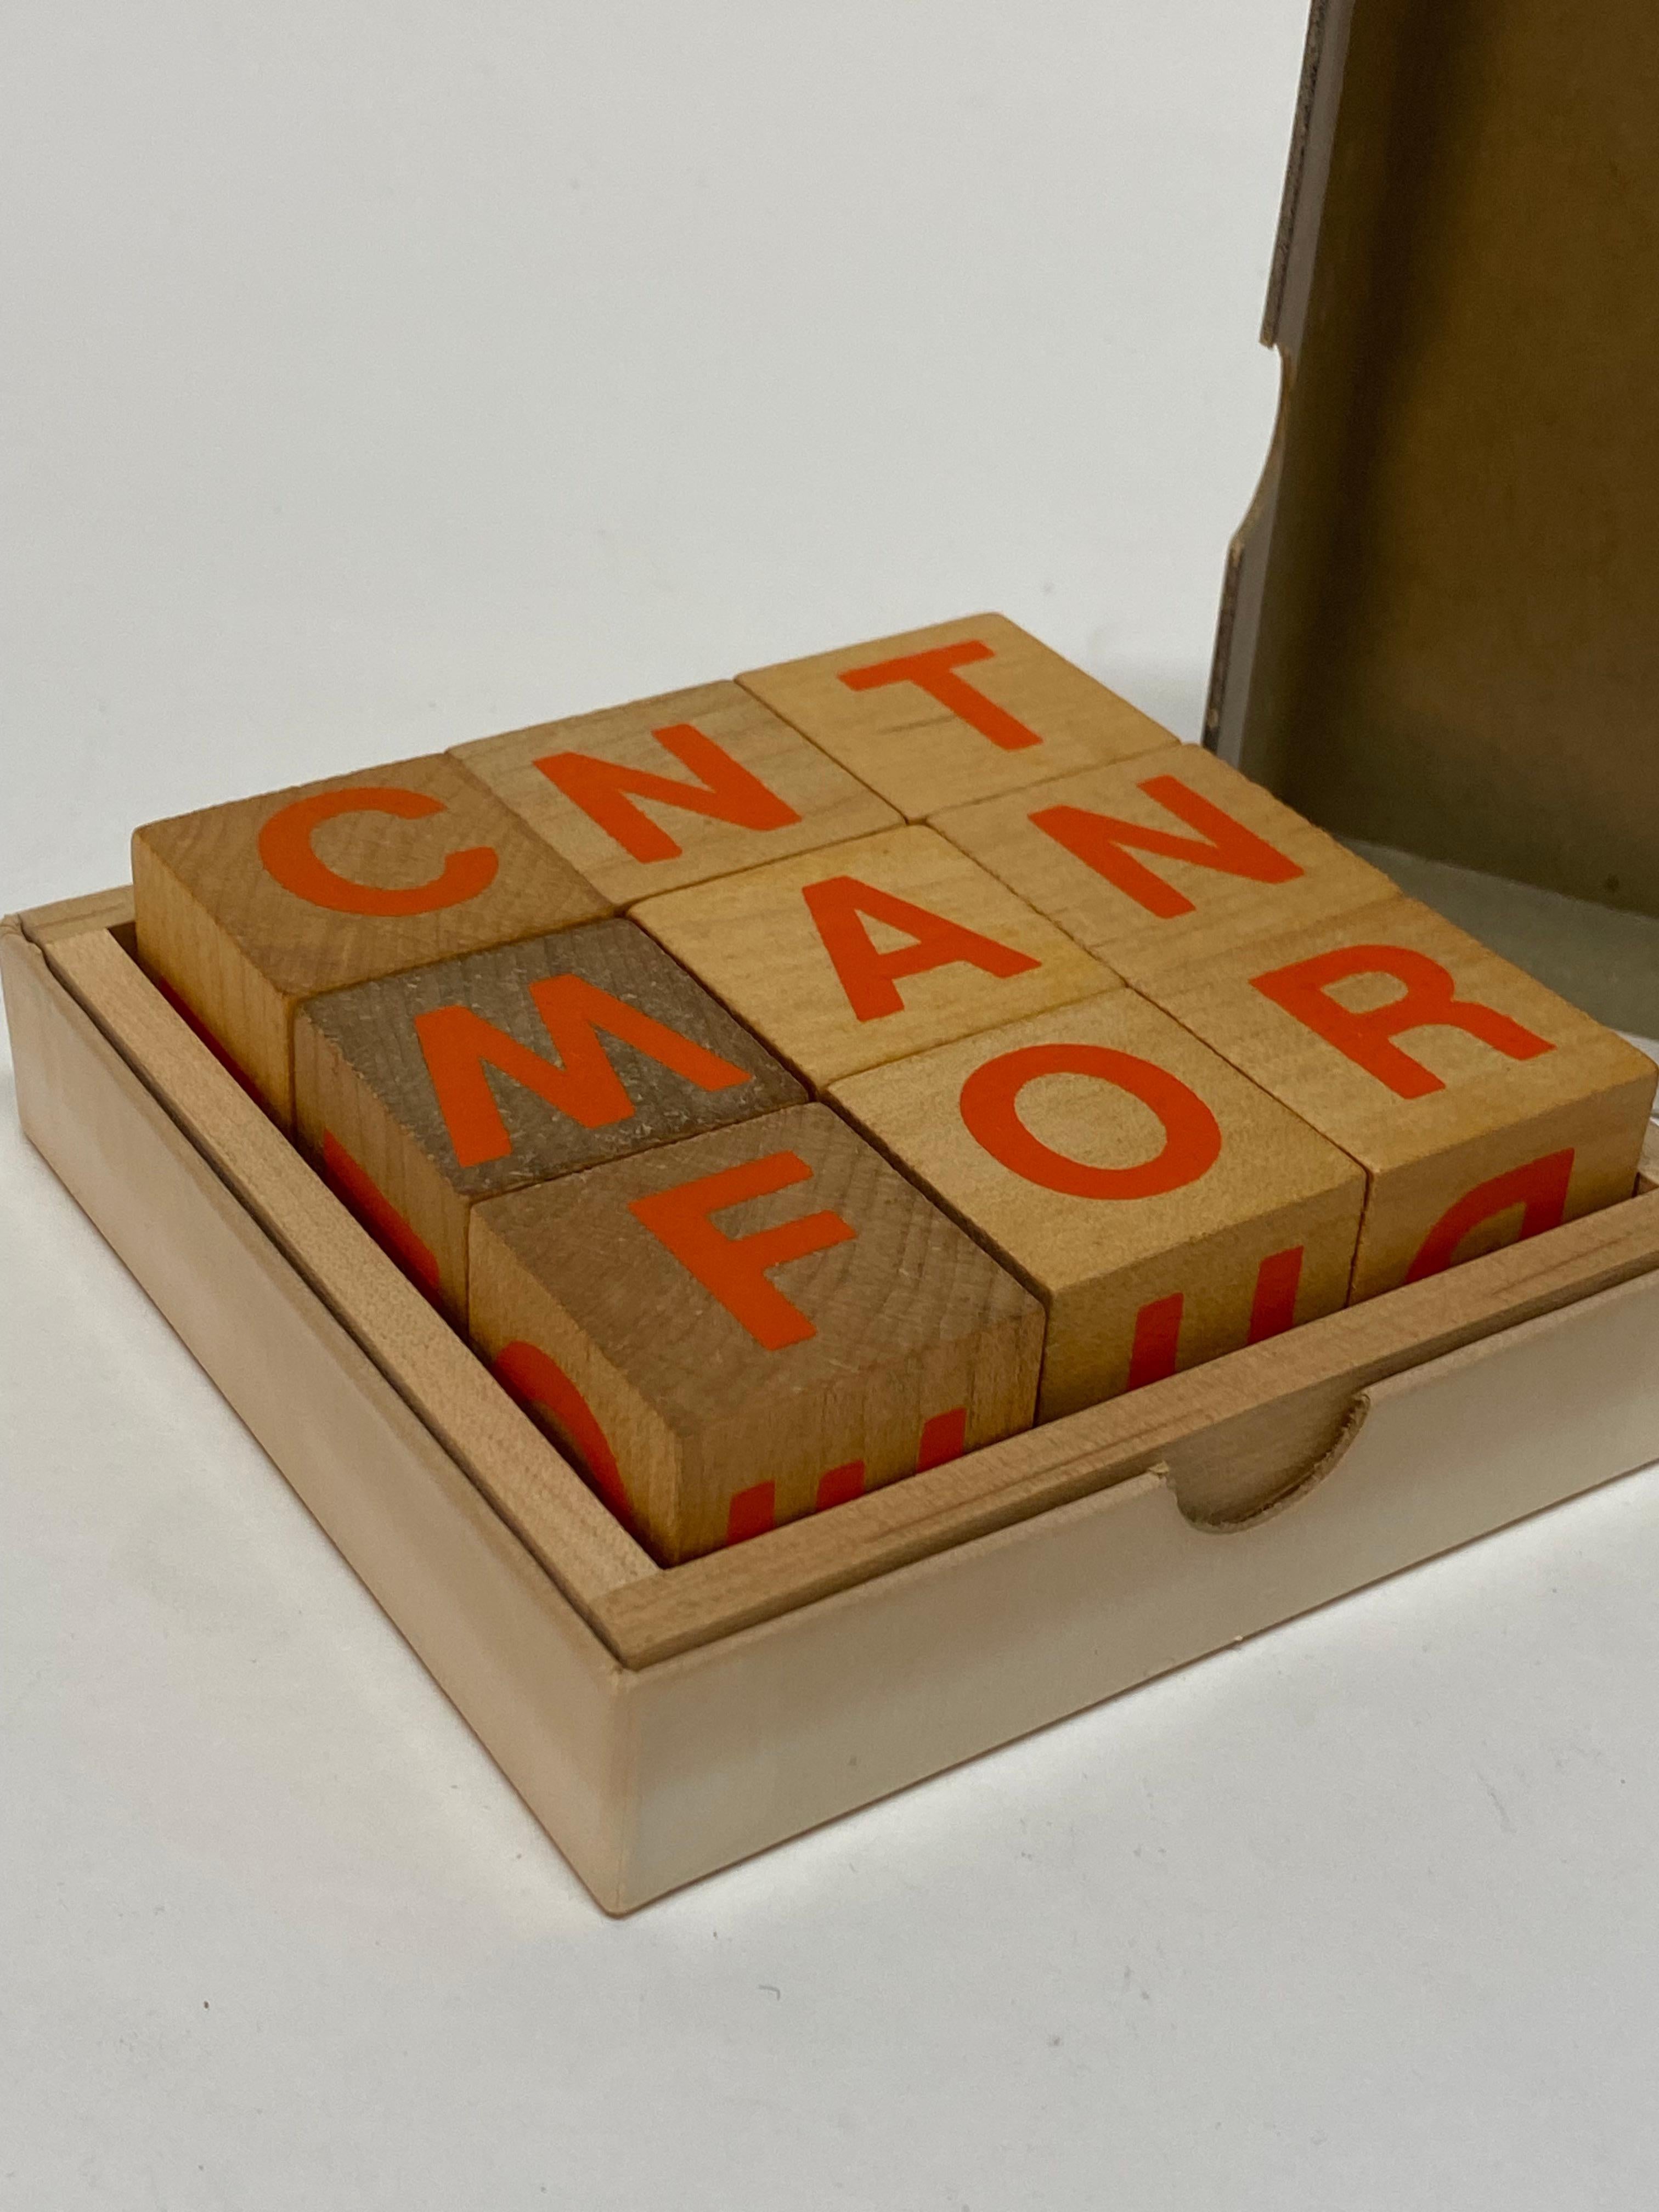 Creative Playthings Crossword Blocks In Good Condition For Sale In Garnerville, NY